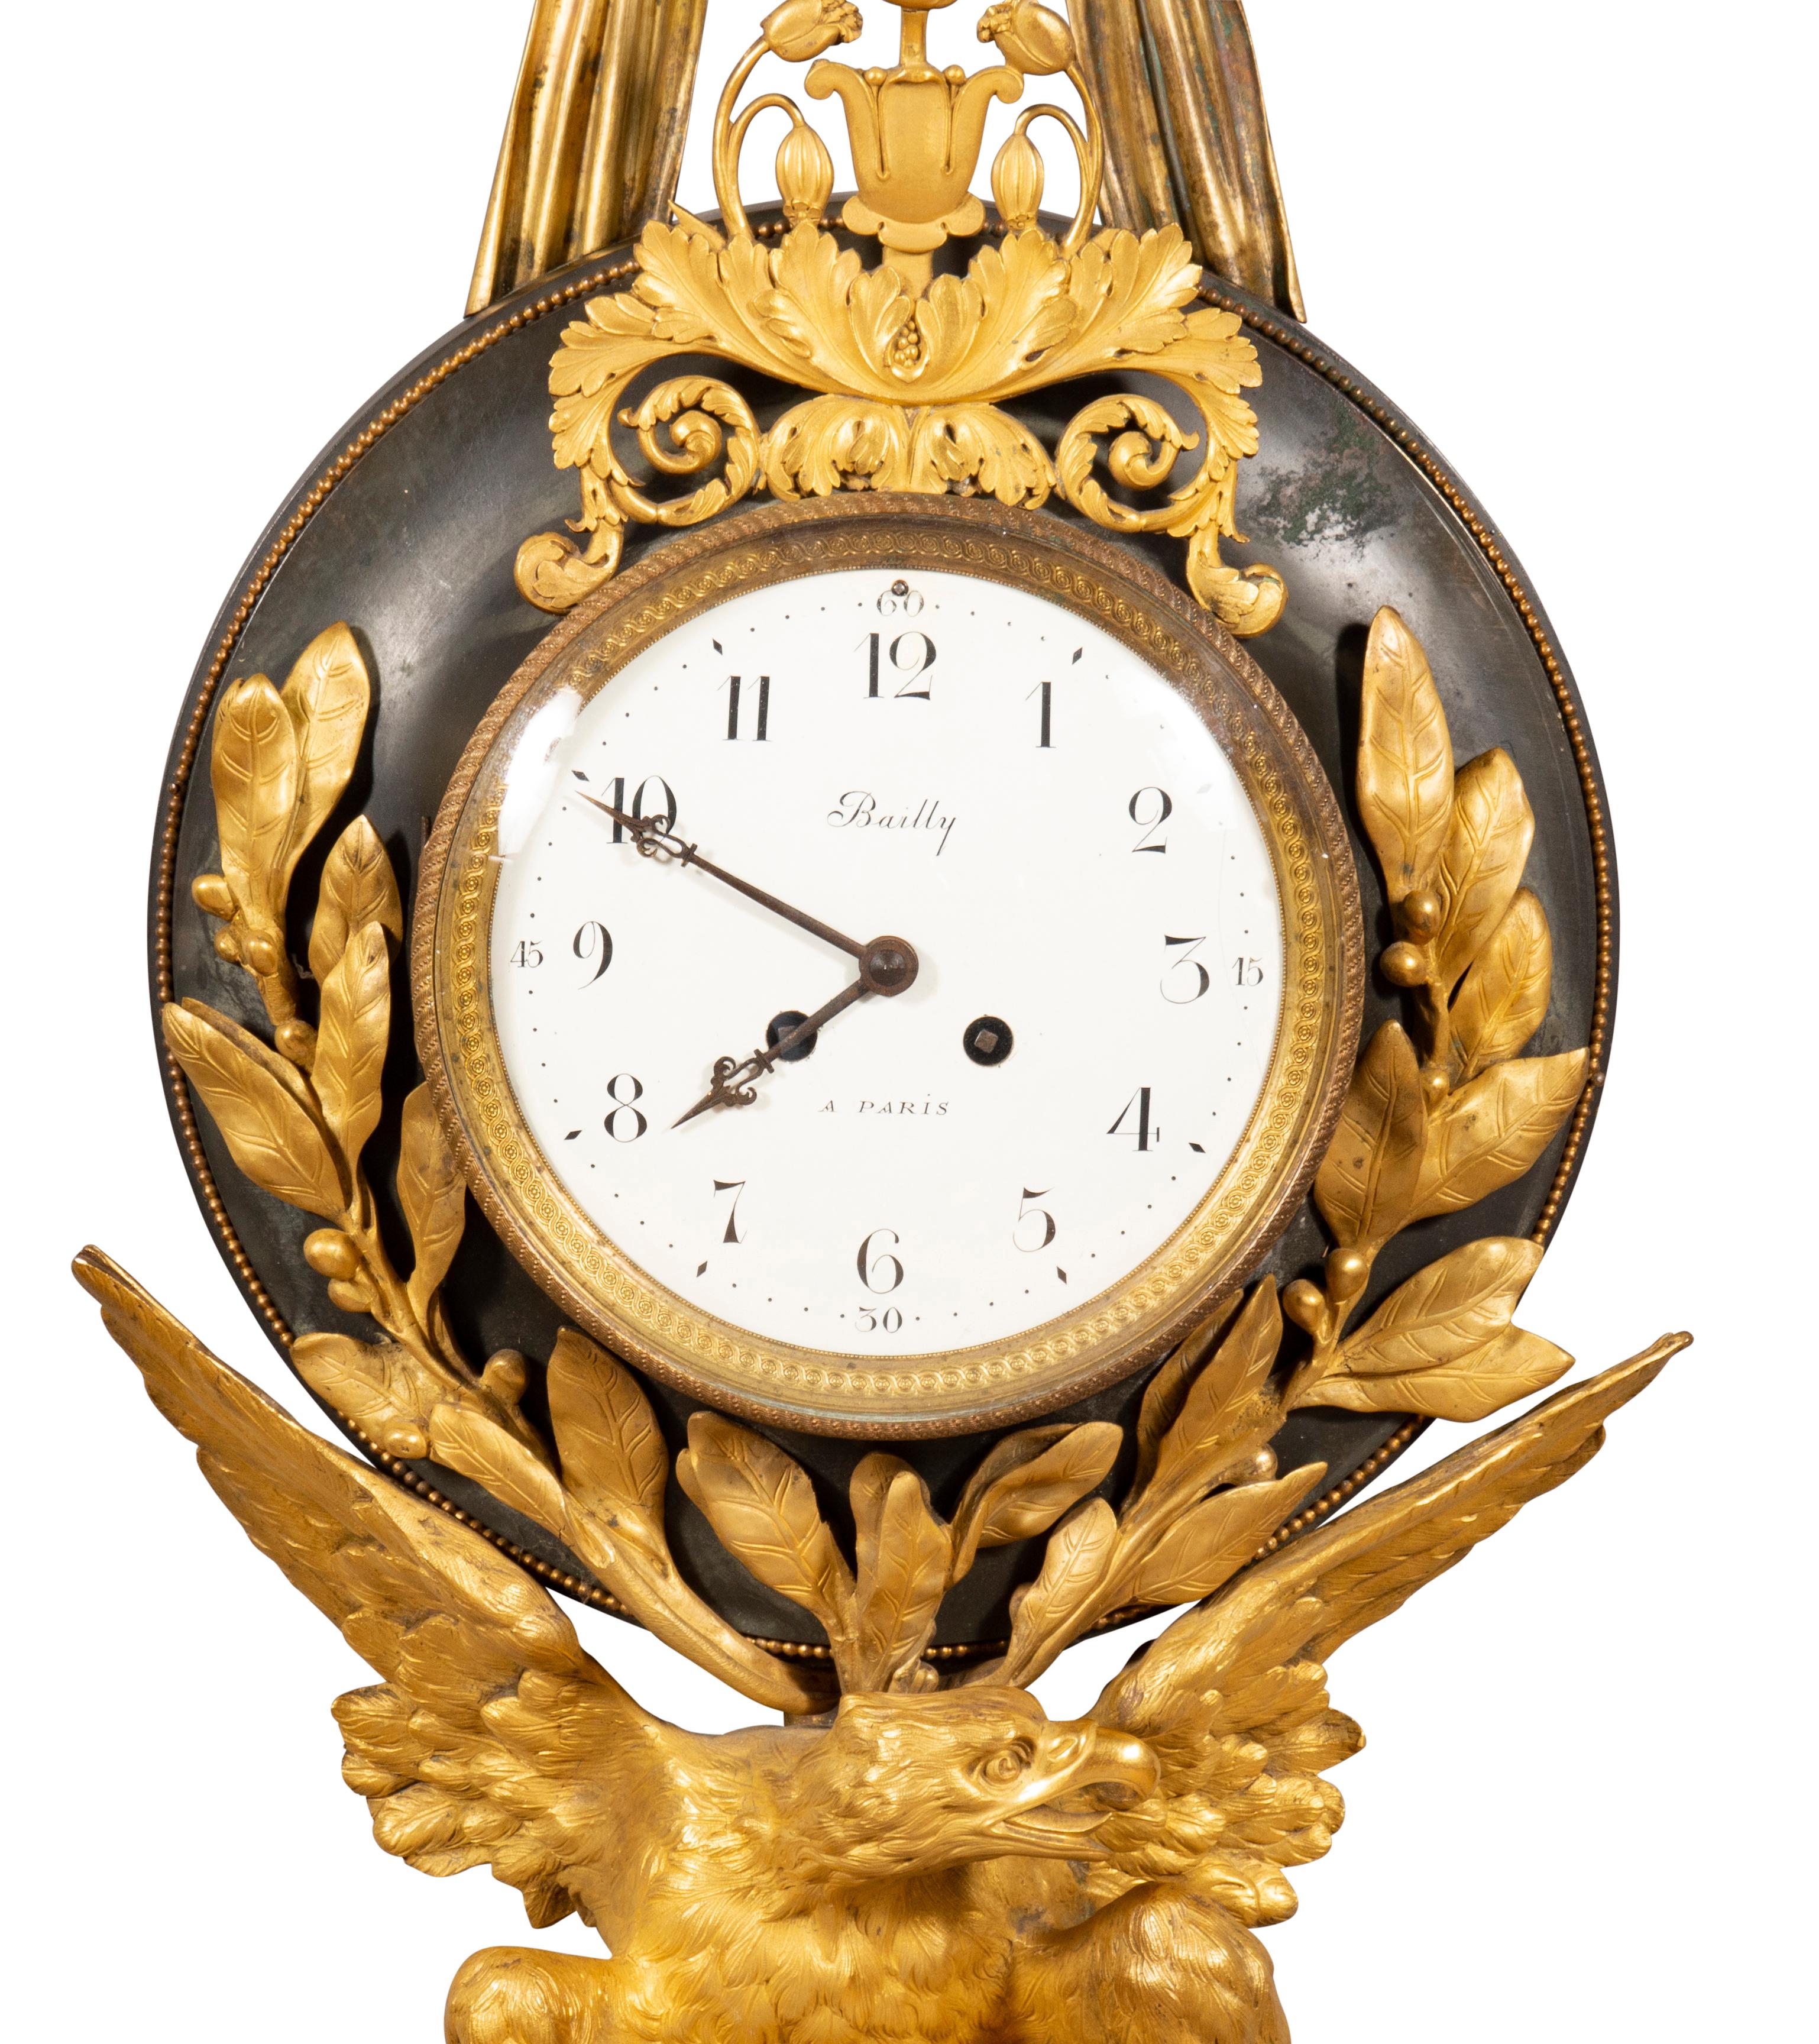 French Empire Bronze and Ormolu Cartel Clock by Bailly, Paris For Sale